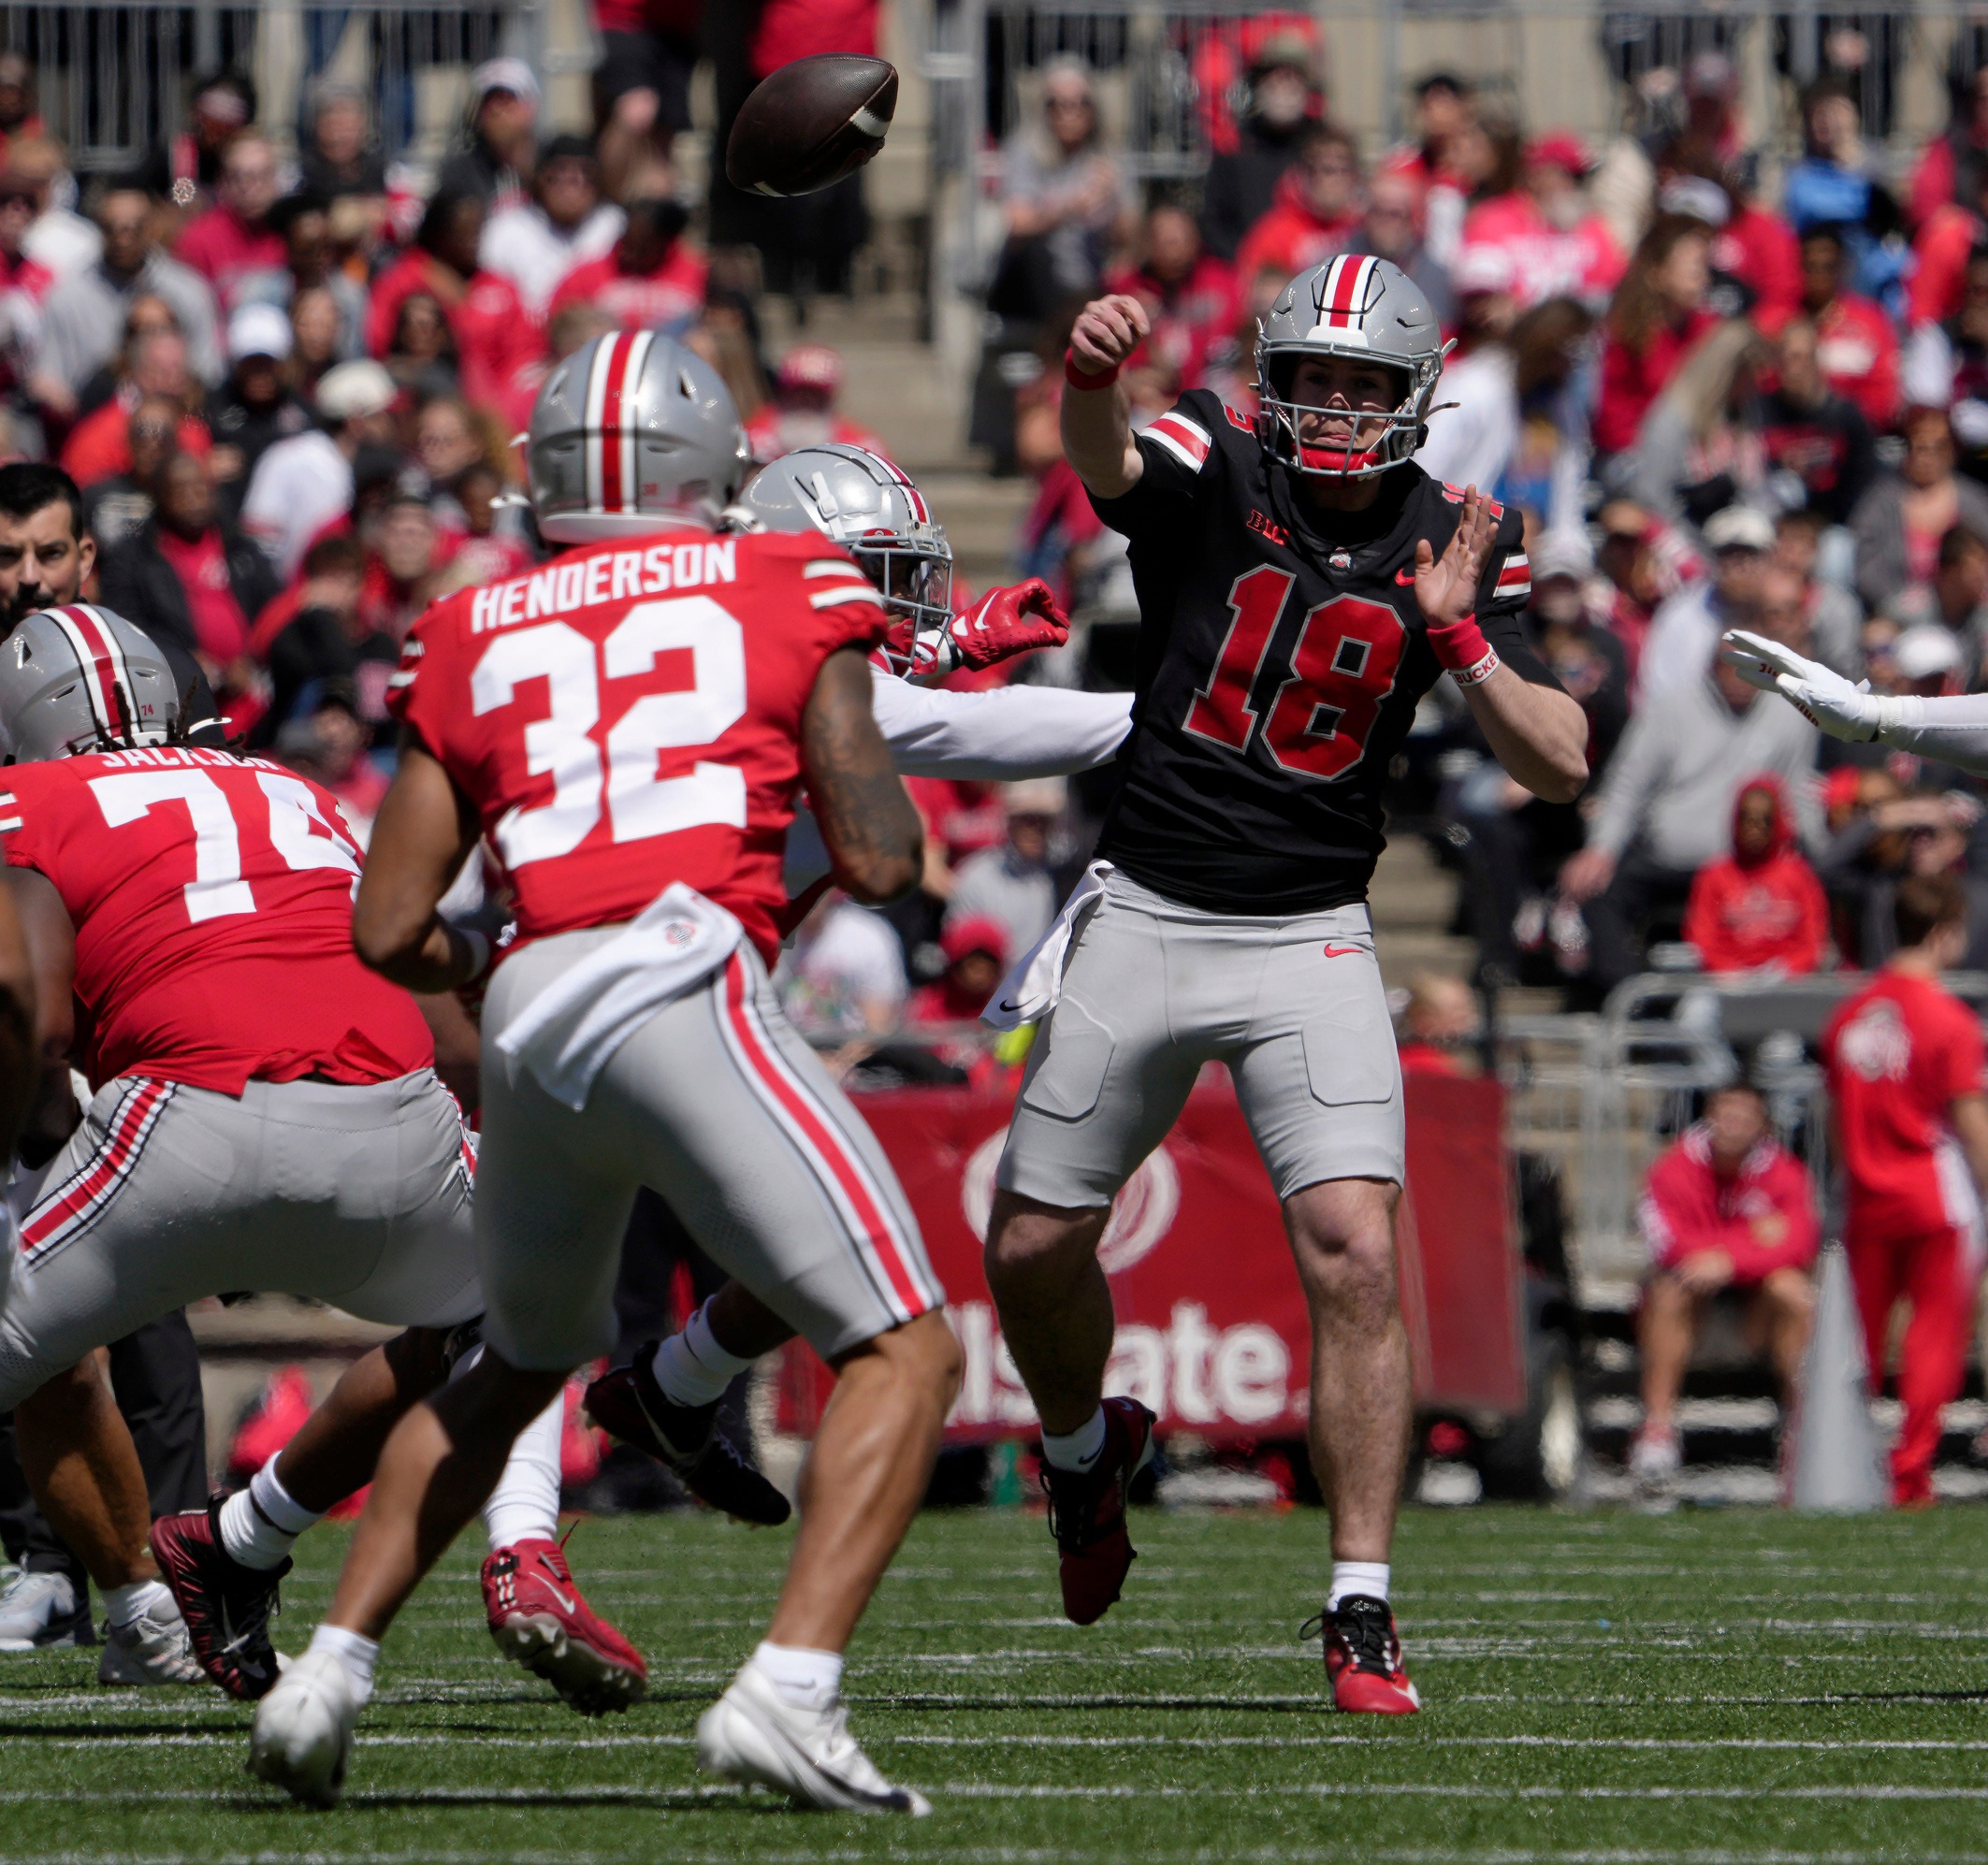 The 2024 Ohio State quarterback battle was not settled in this year's Spring Game as each player had ups and downs.